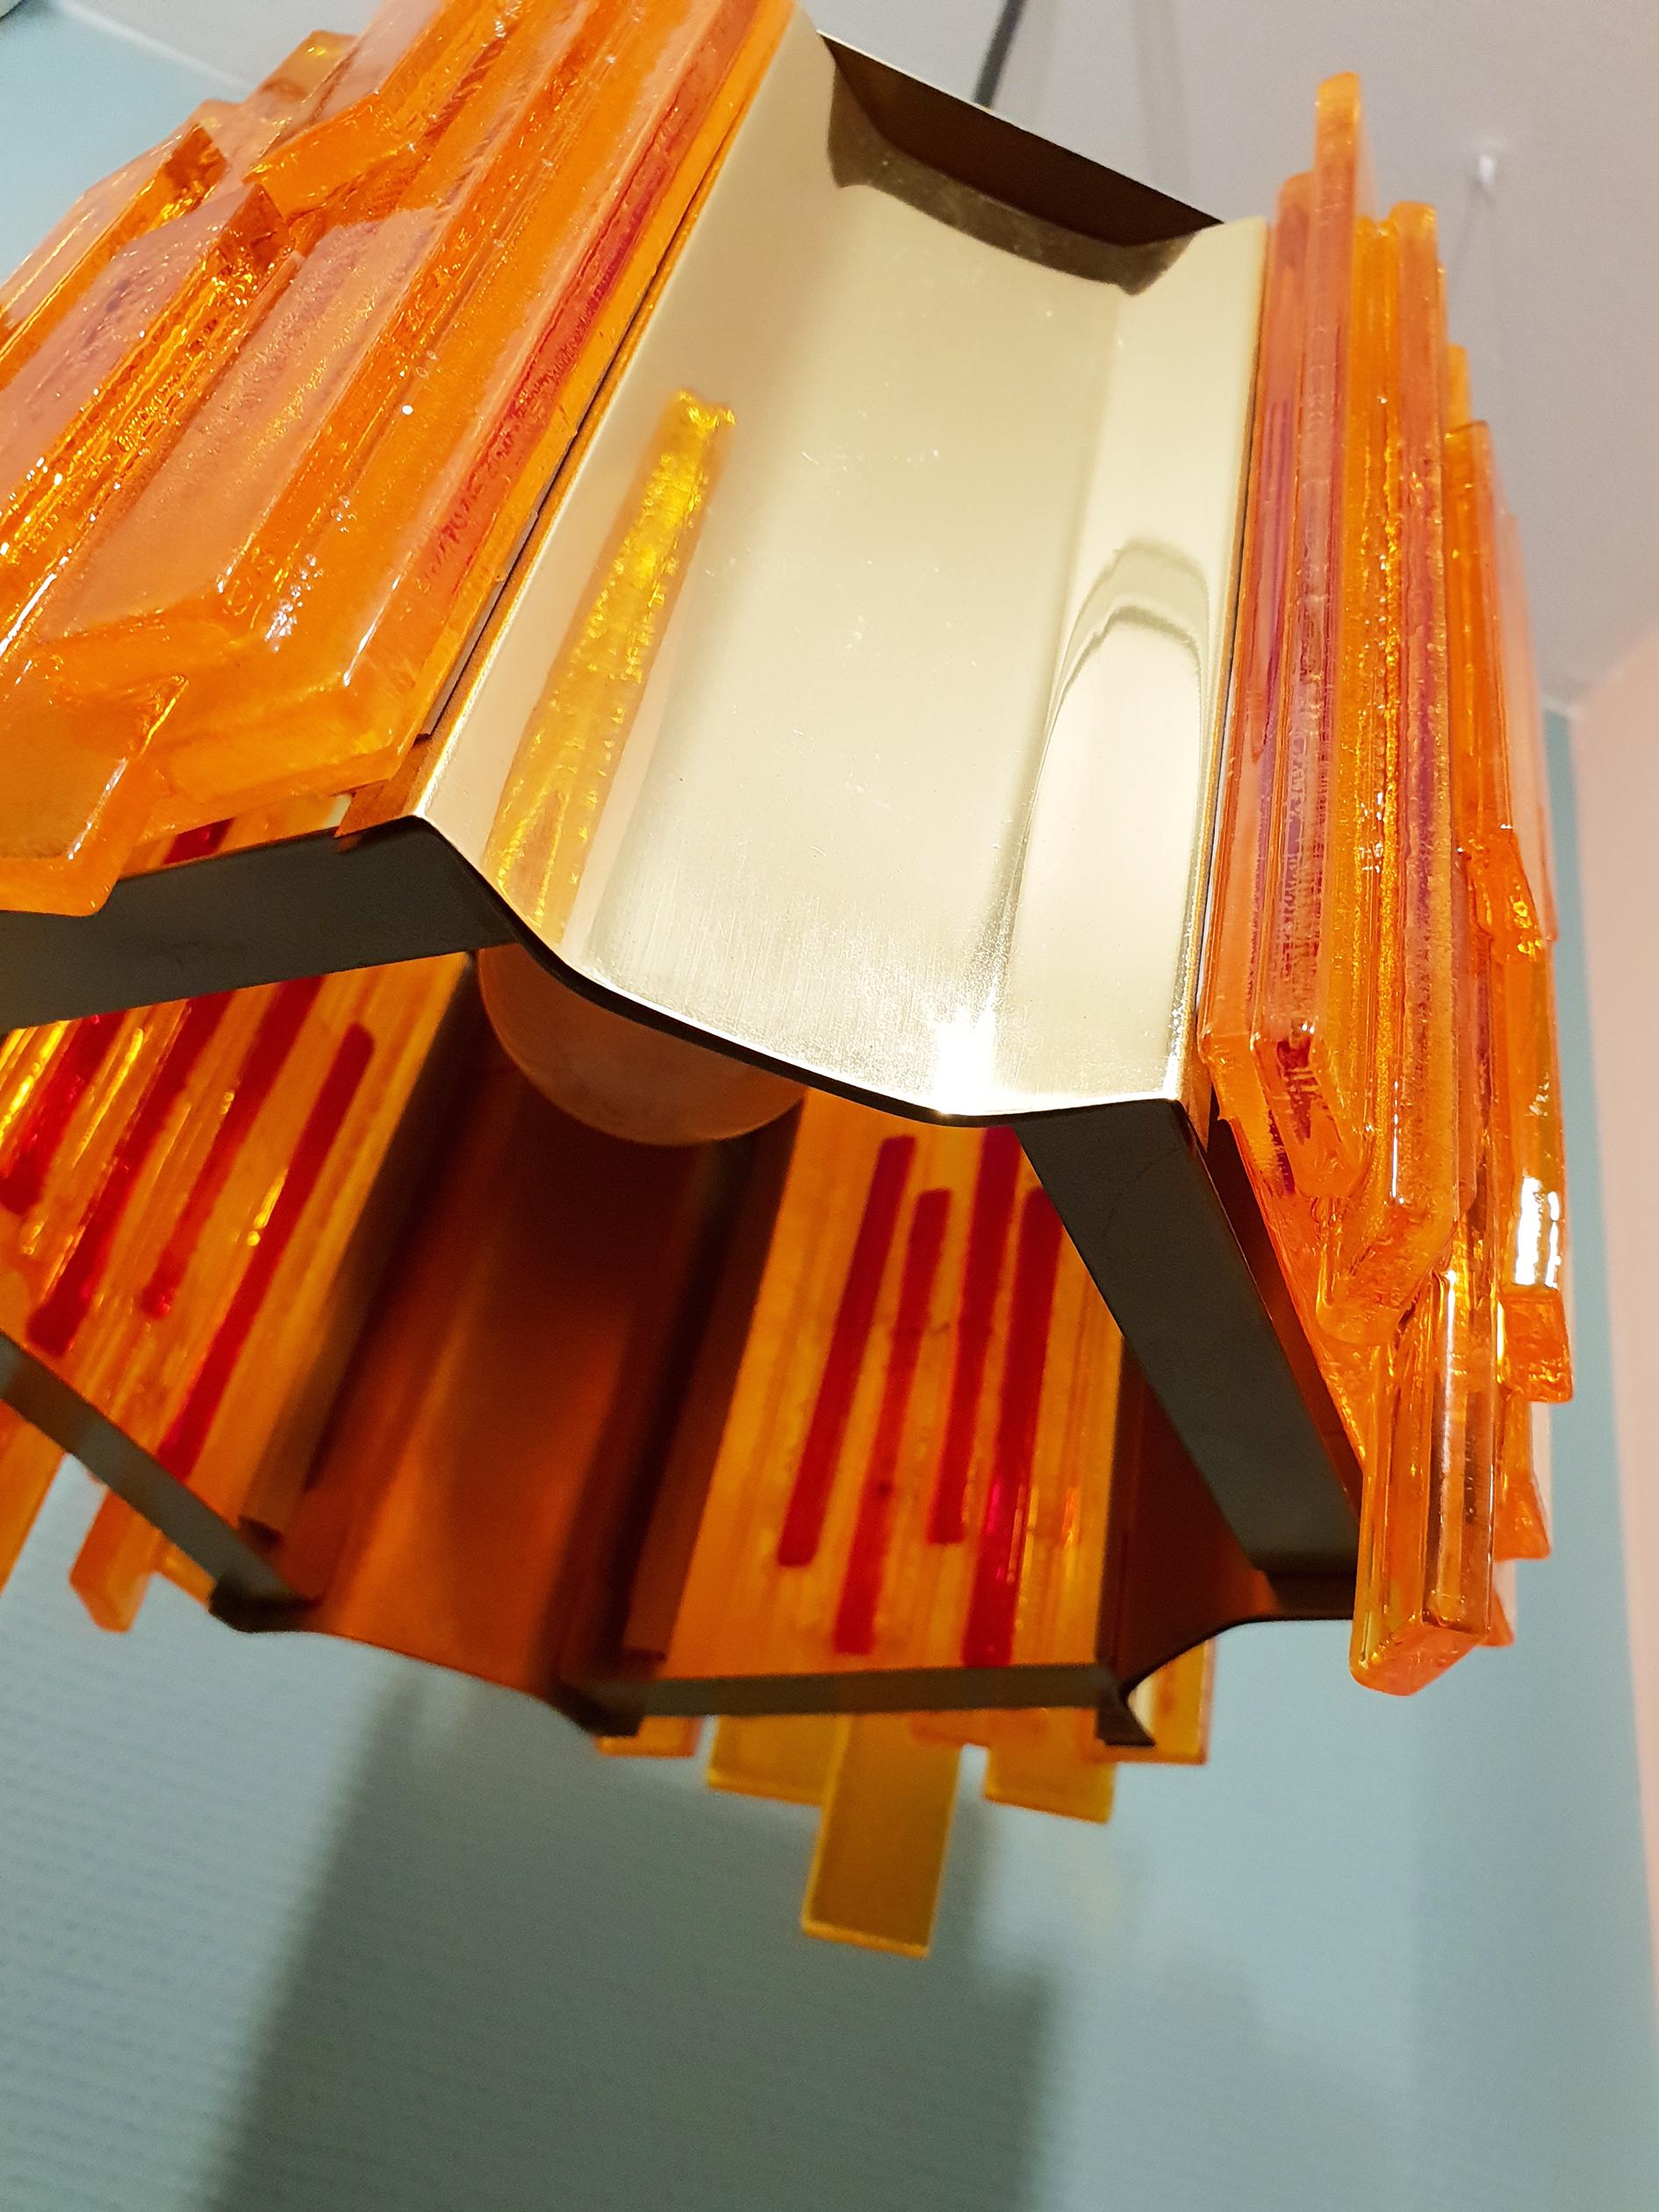 Danish midcentury Scandinavian Modern Space Age octagon shaped pendant designed by Claus Bolby in the 1970s and manufactured by CeBo Industri. 
This lampe has 4 concave brass pieces intermixed with four orange acrylic pieces composed of many